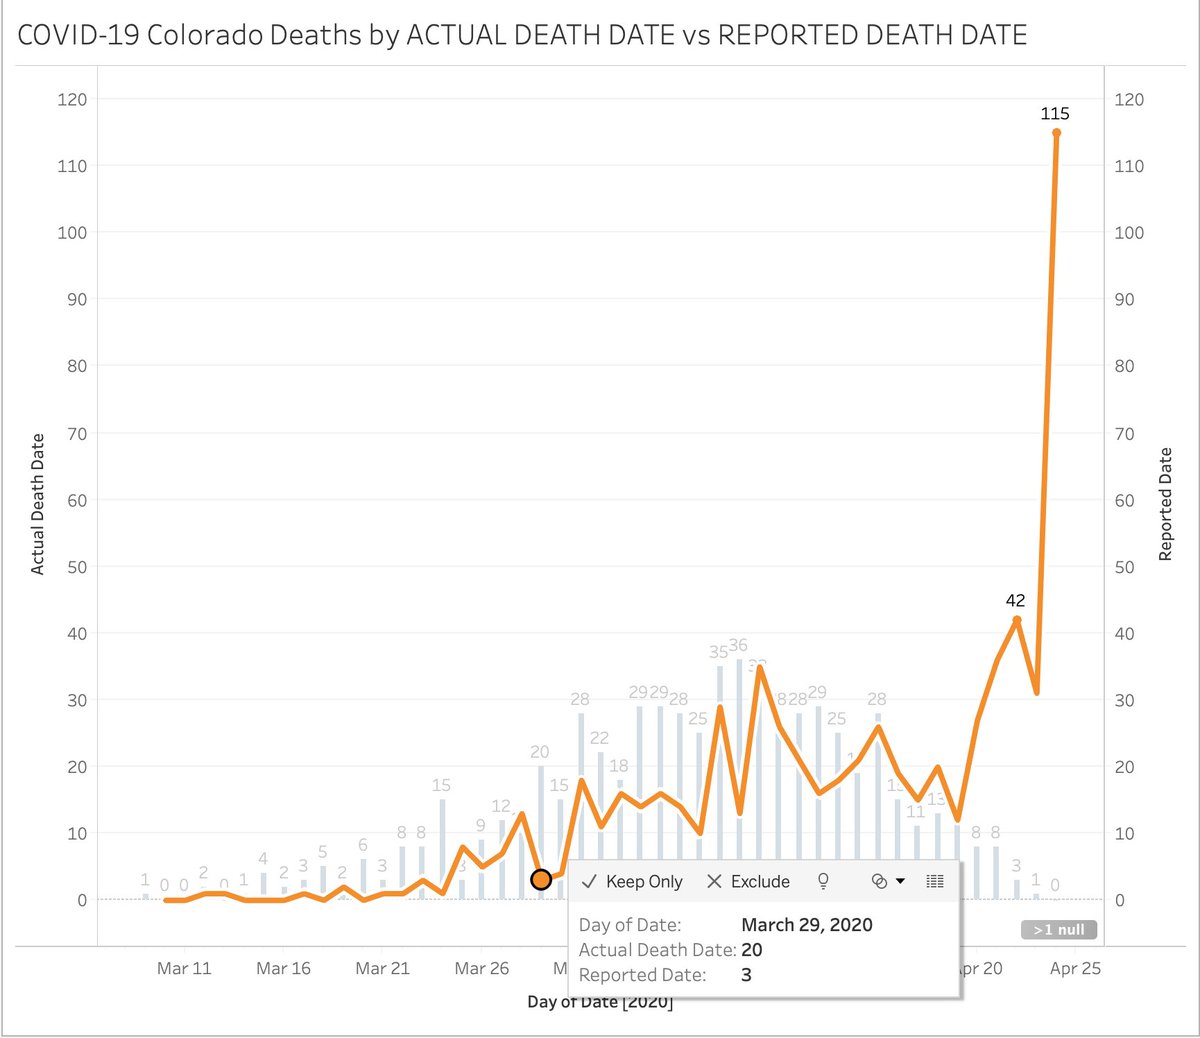 7/ So where did those 120 deaths come from. Oh those are real deaths (or at least WIDE-latitude counted deaths from  #COVID19) but they had to layer them back into the past. So on March 20th the dashboards told us only 3 people died. 20 people actually died on that day.